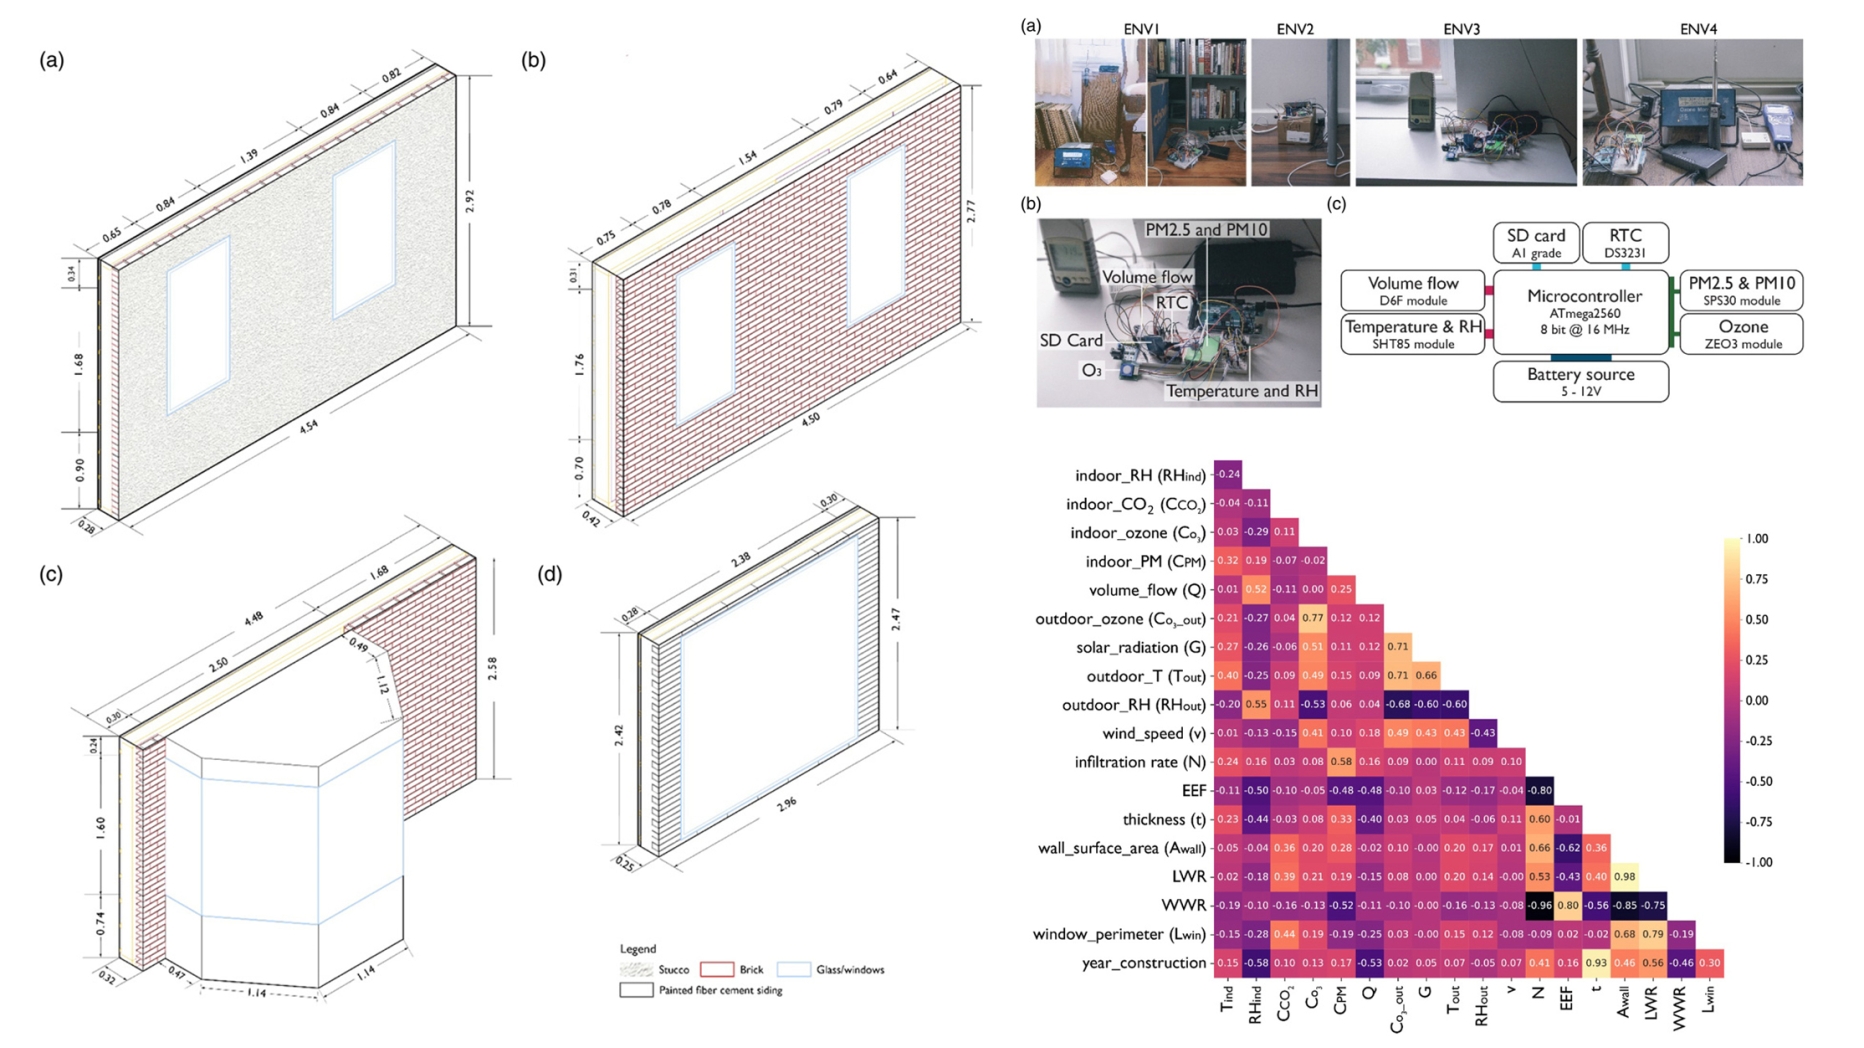 Impacts of building envelope design on indoor ozone exposures and health risks